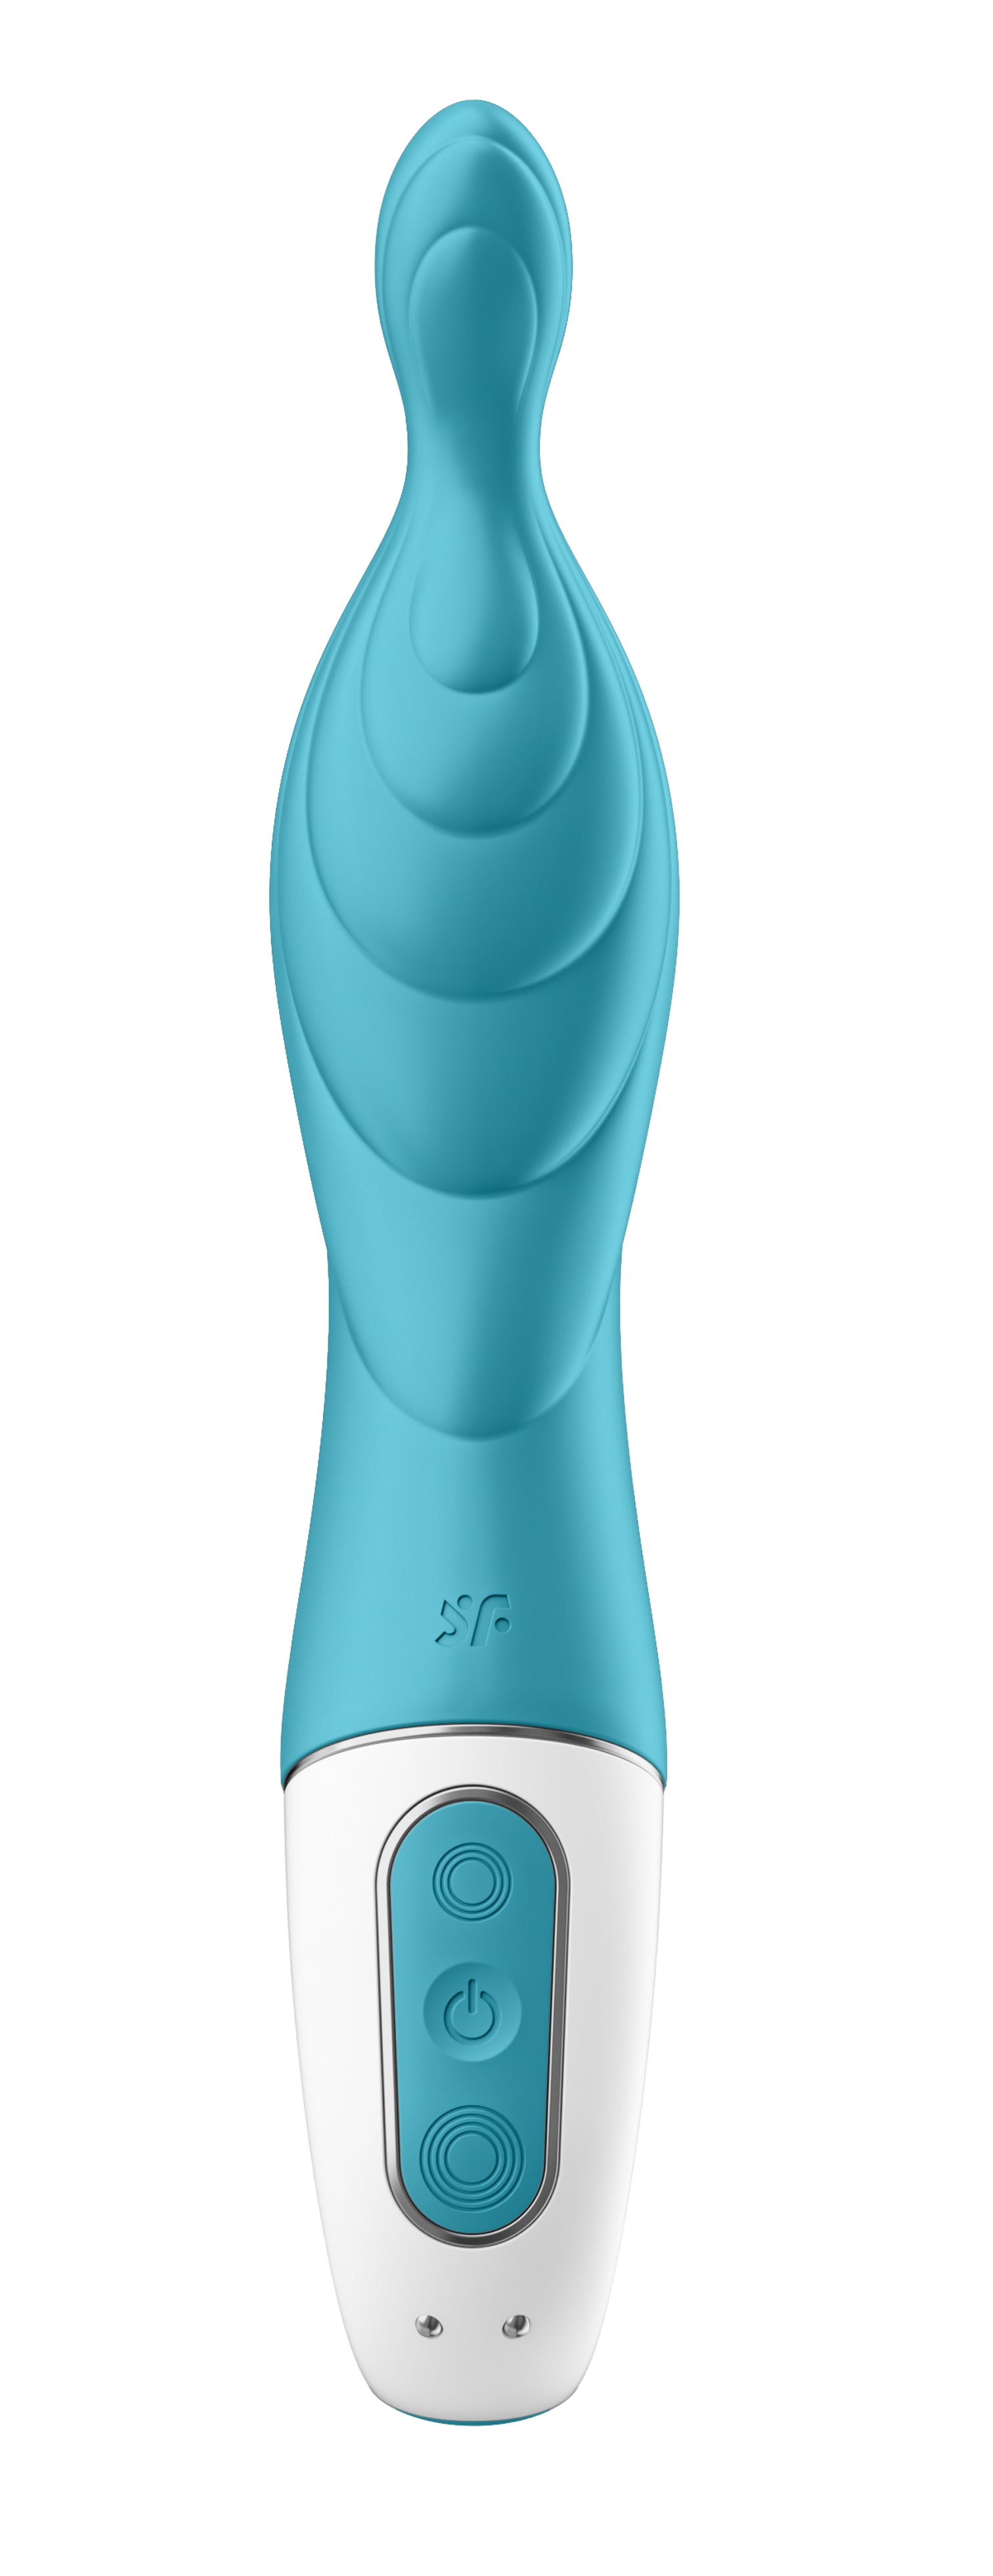 A-Mazing 2 a-Spot Vibrator - Turquoise Turquoise-0